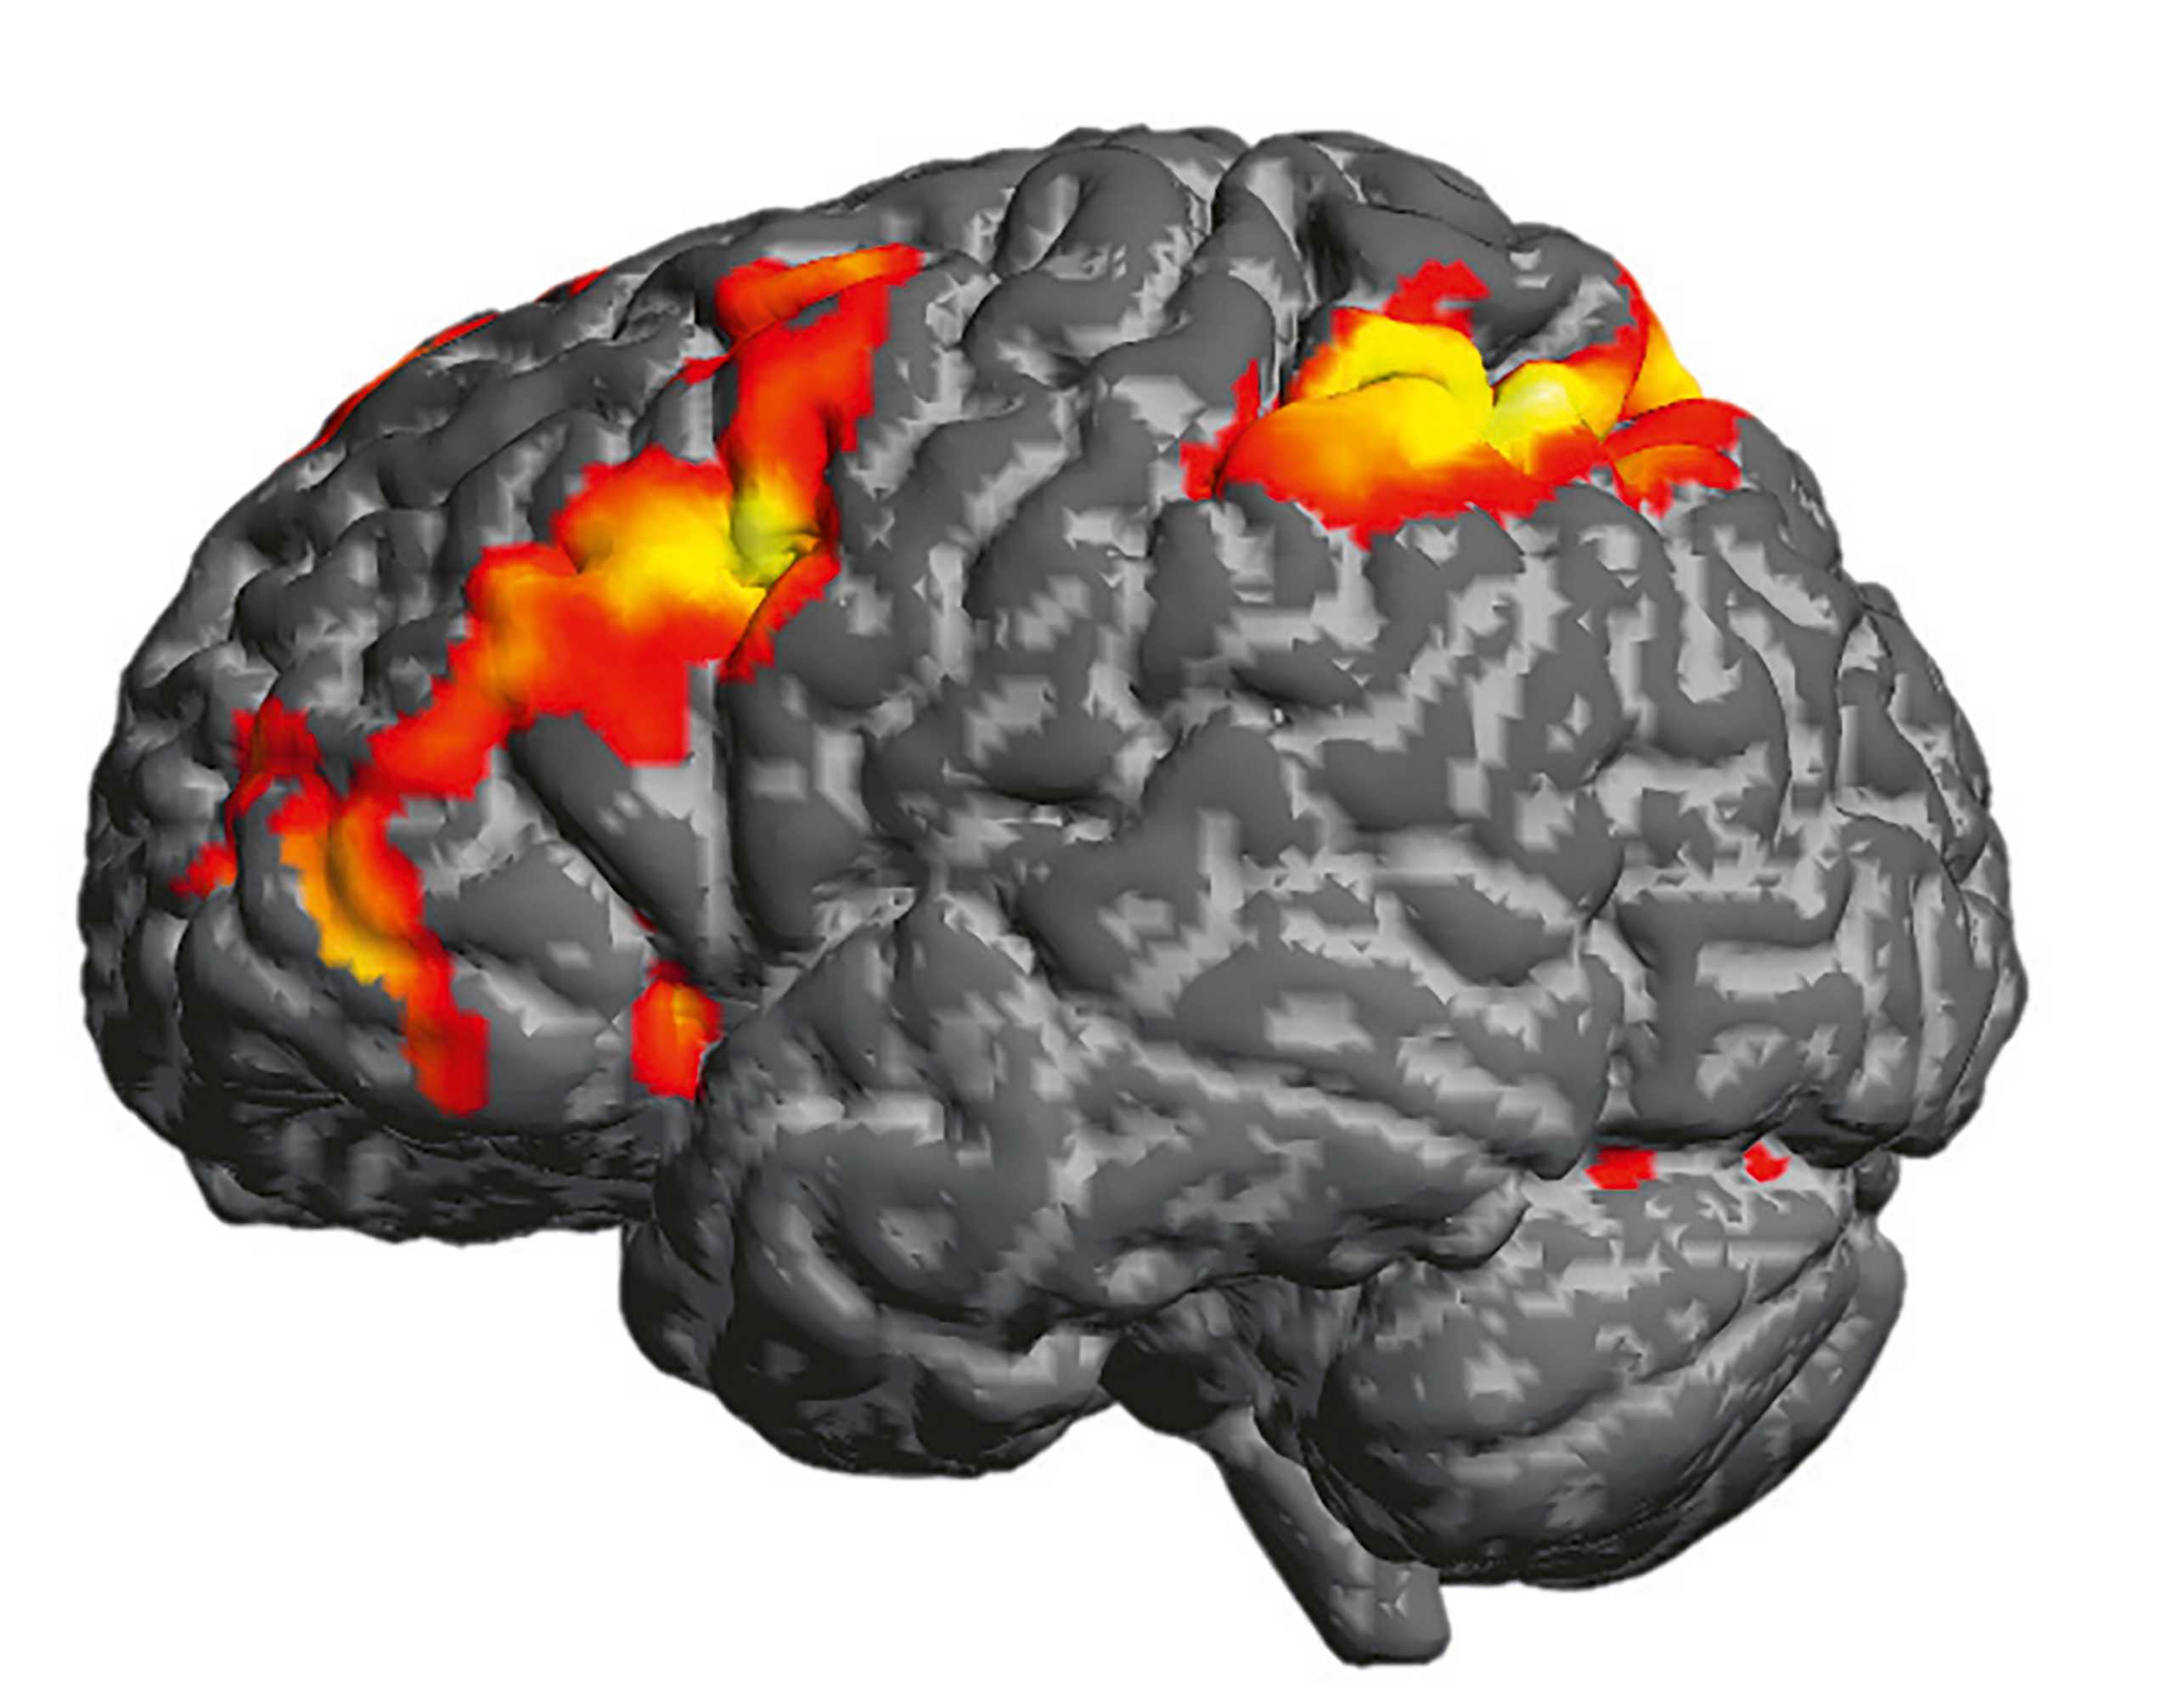 Magnetic resonance imaging of the brain, certain areas are gray, others yellow to dark orange.